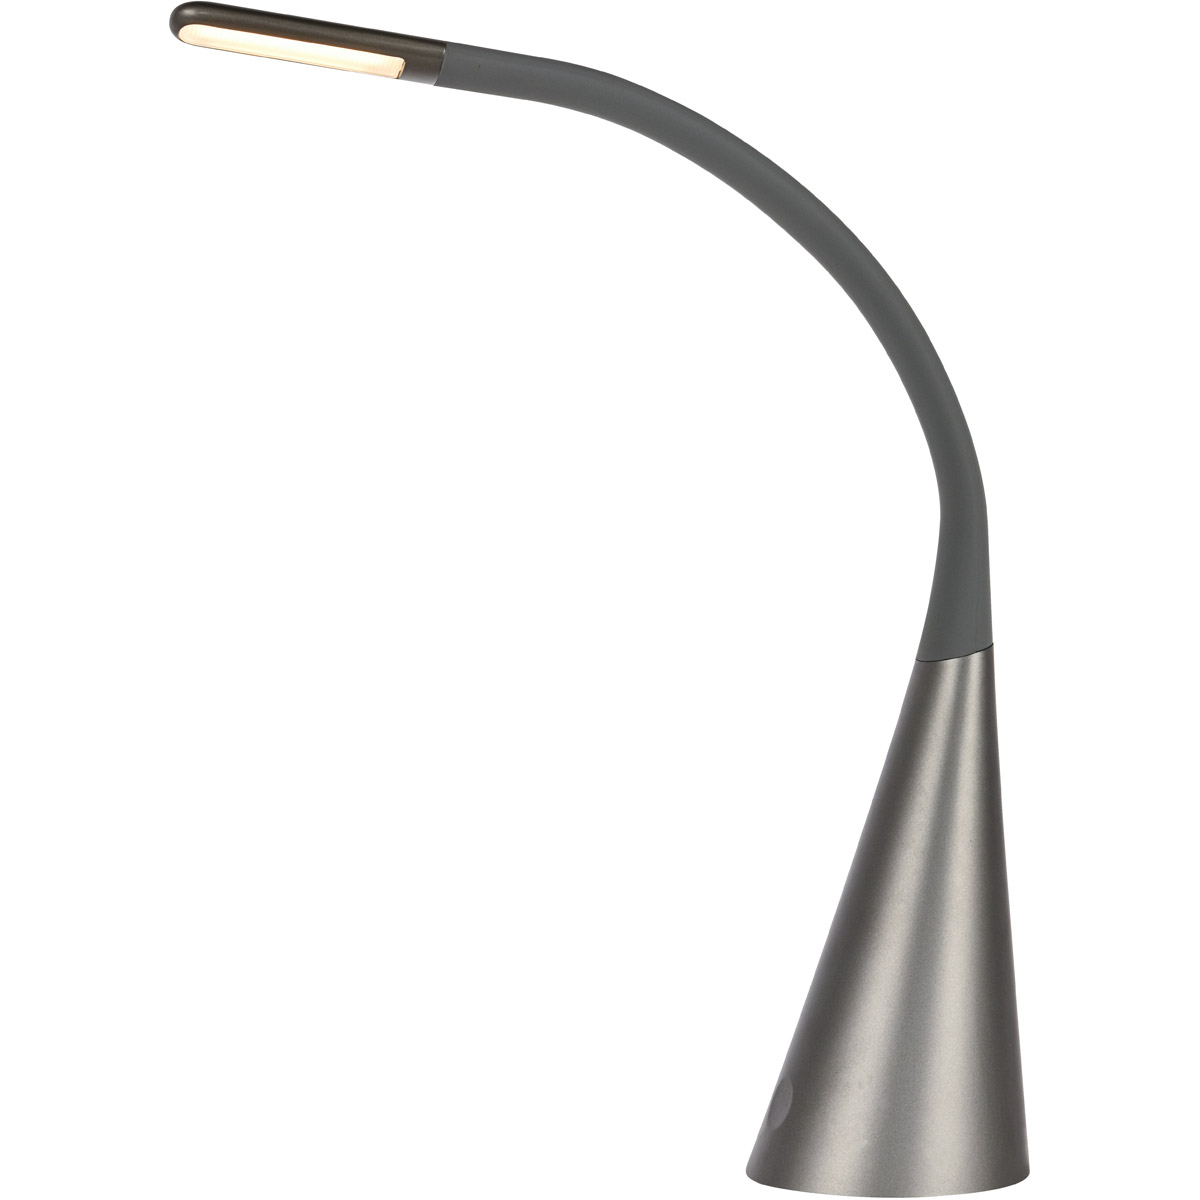 Ledds003 Sleek Led Desk Lamp With Smooth Touch Dimmer & Usb, Metallic Grey